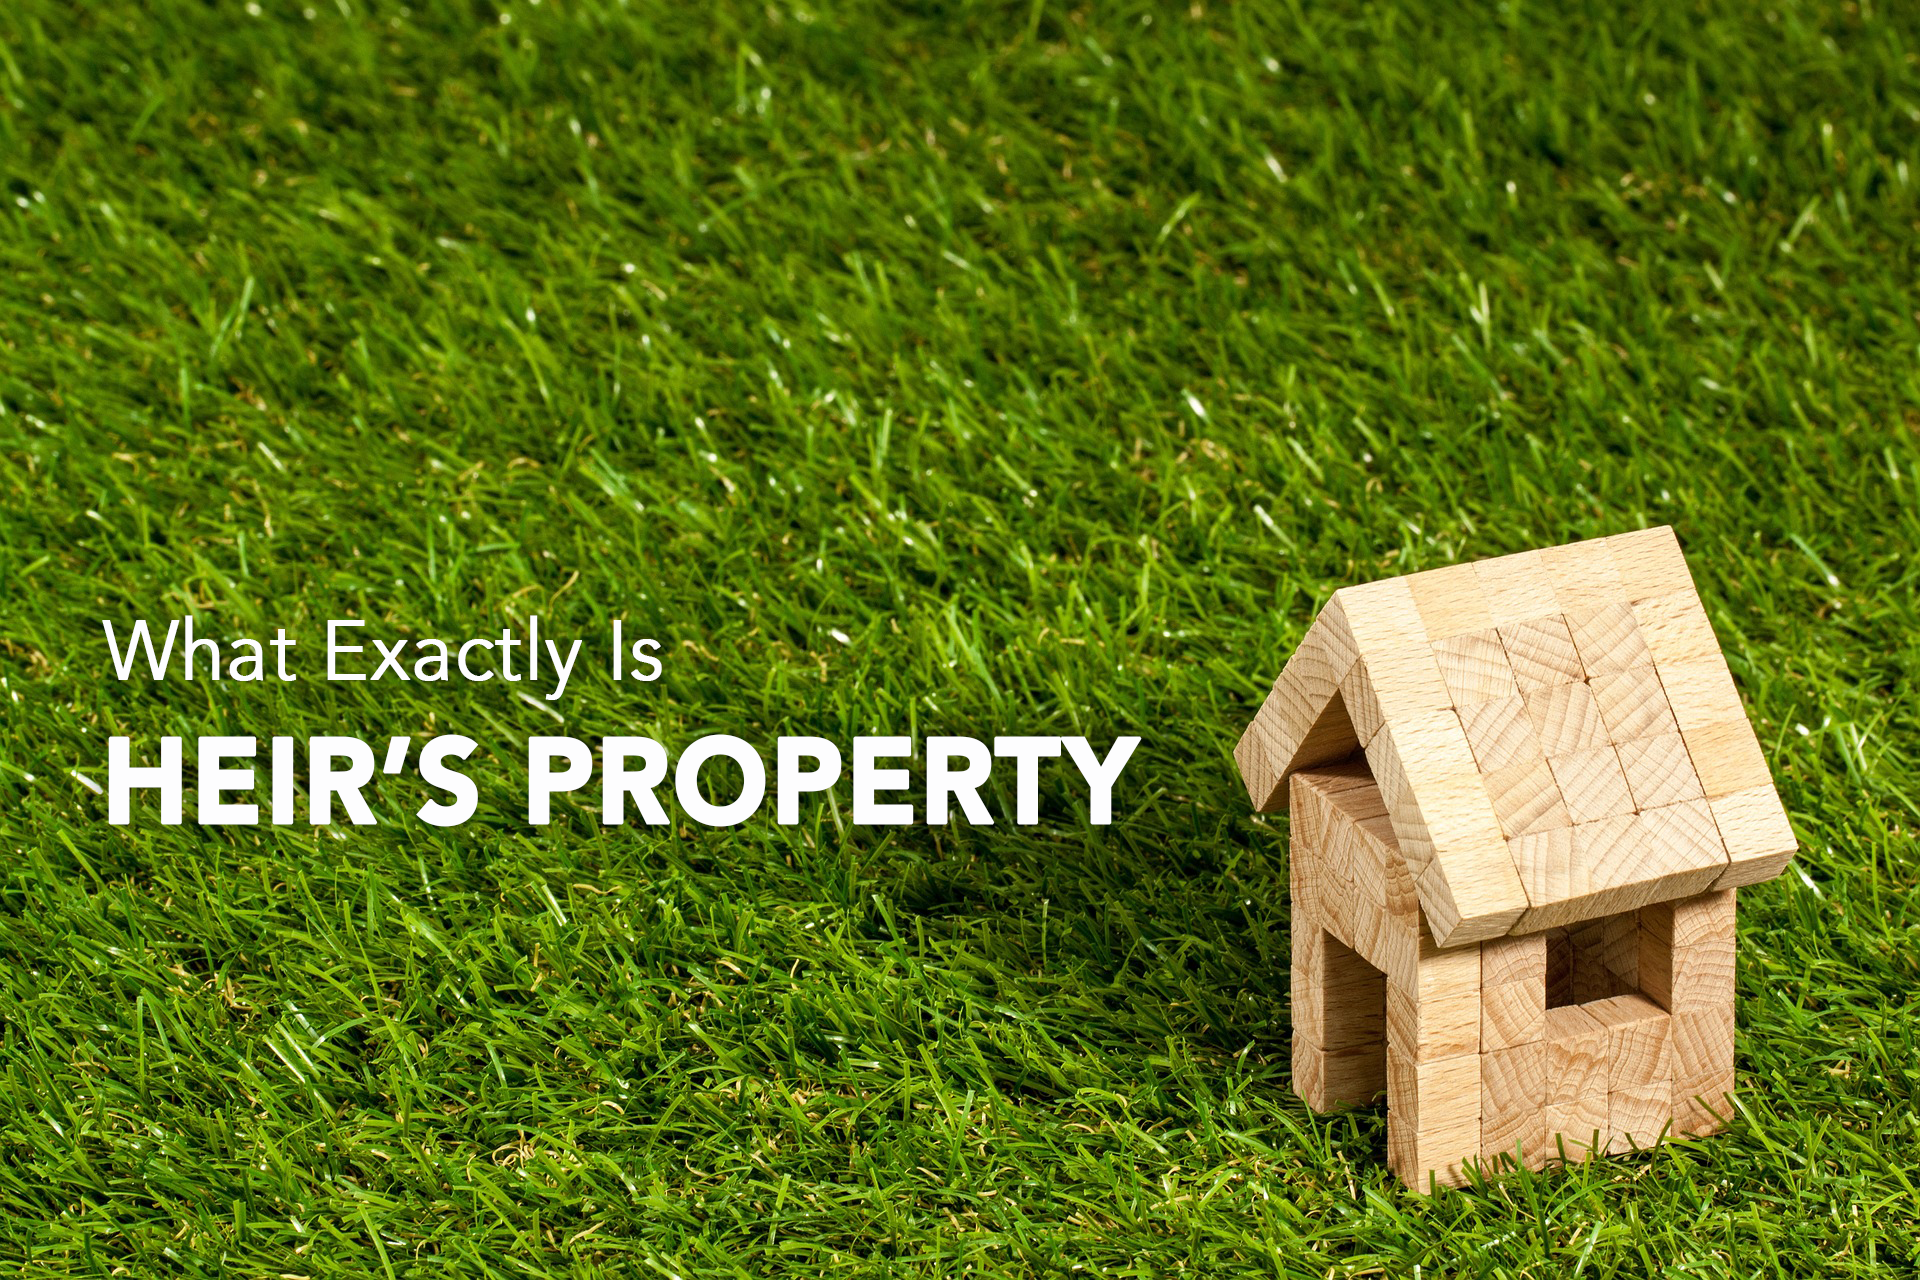 heirs' property cautions